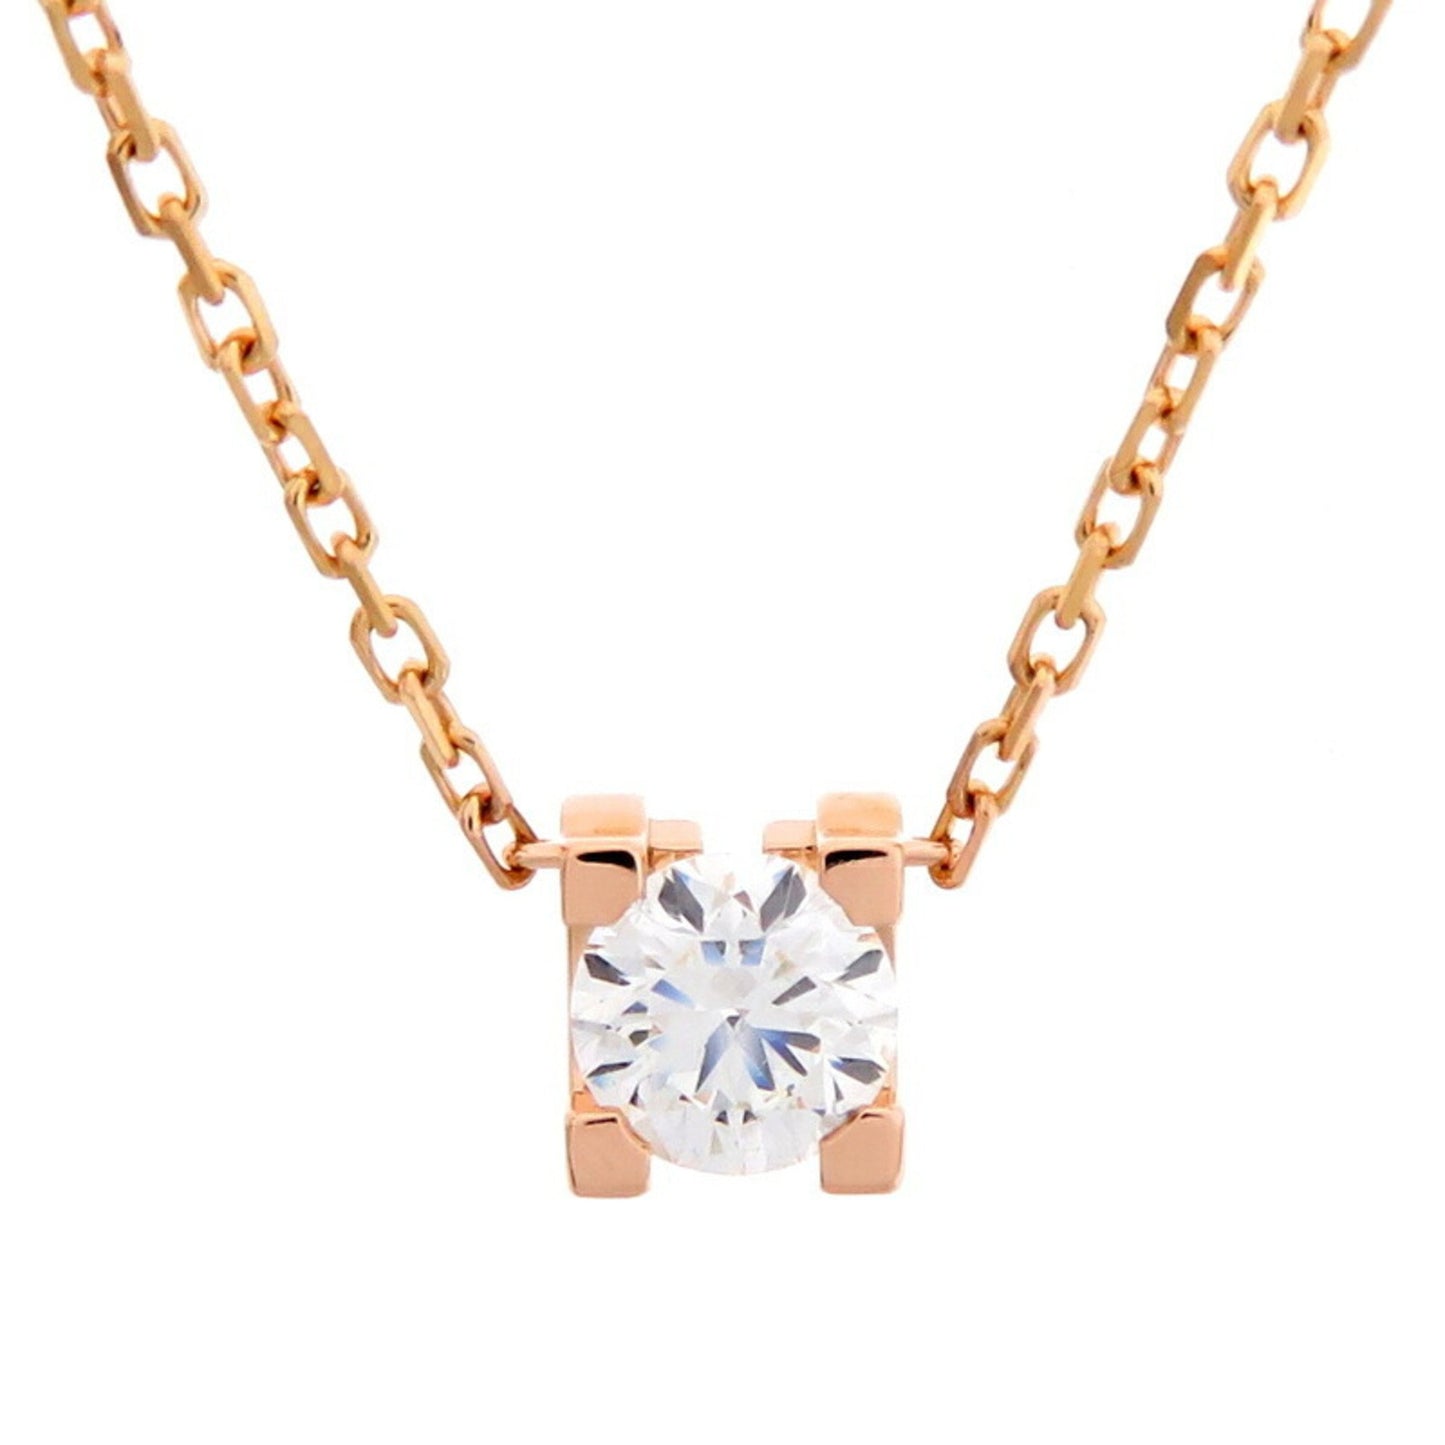 Cartier Women's Rose Gold Diamond Necklace in Pink